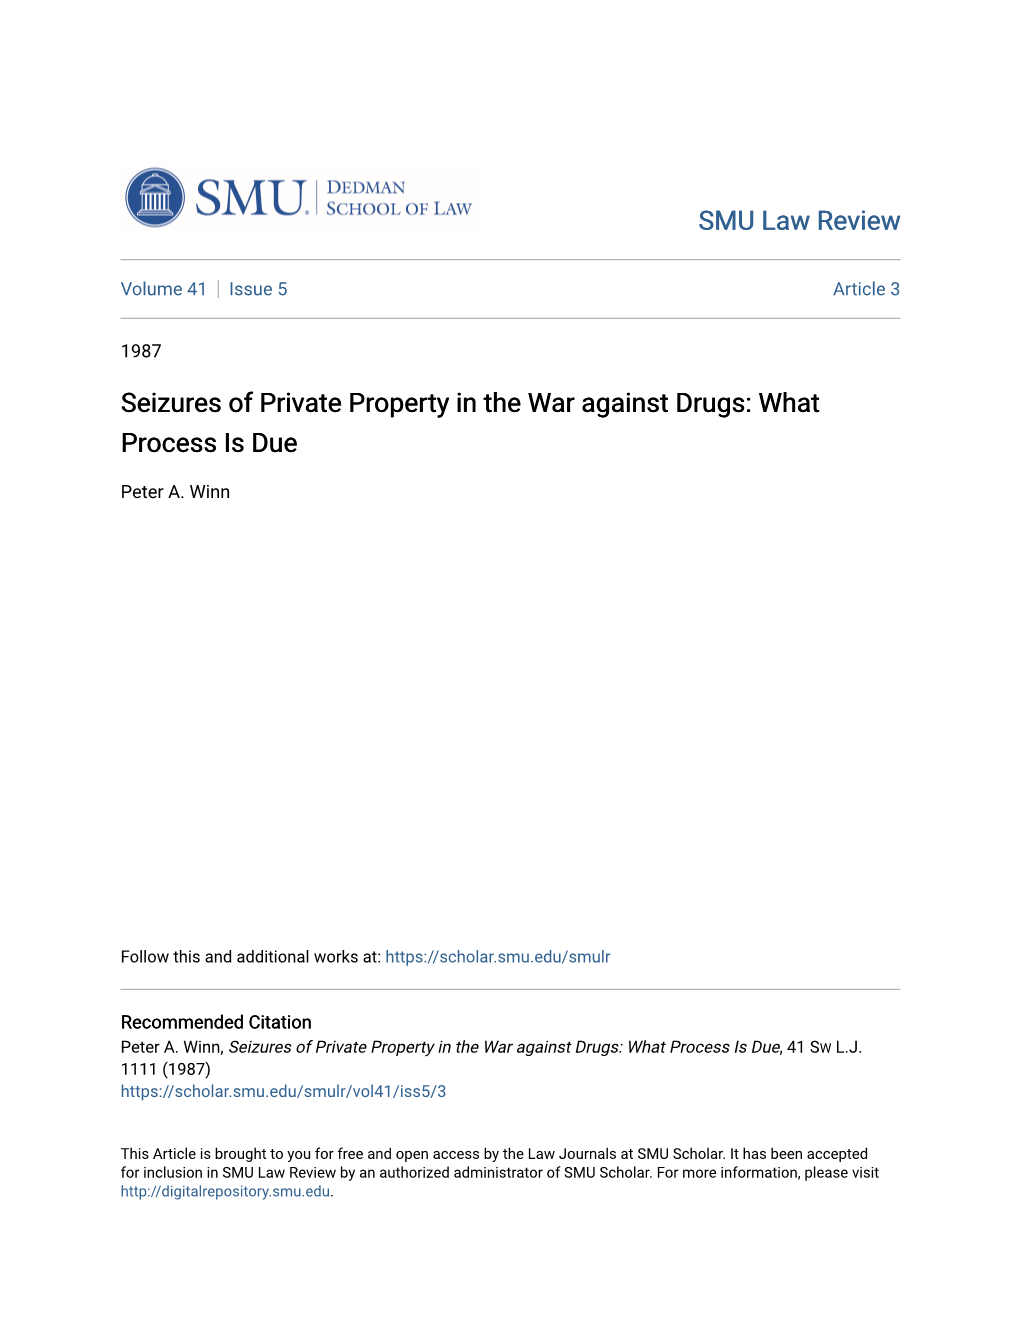 Seizures of Private Property in the War Against Drugs: What Process Is Due